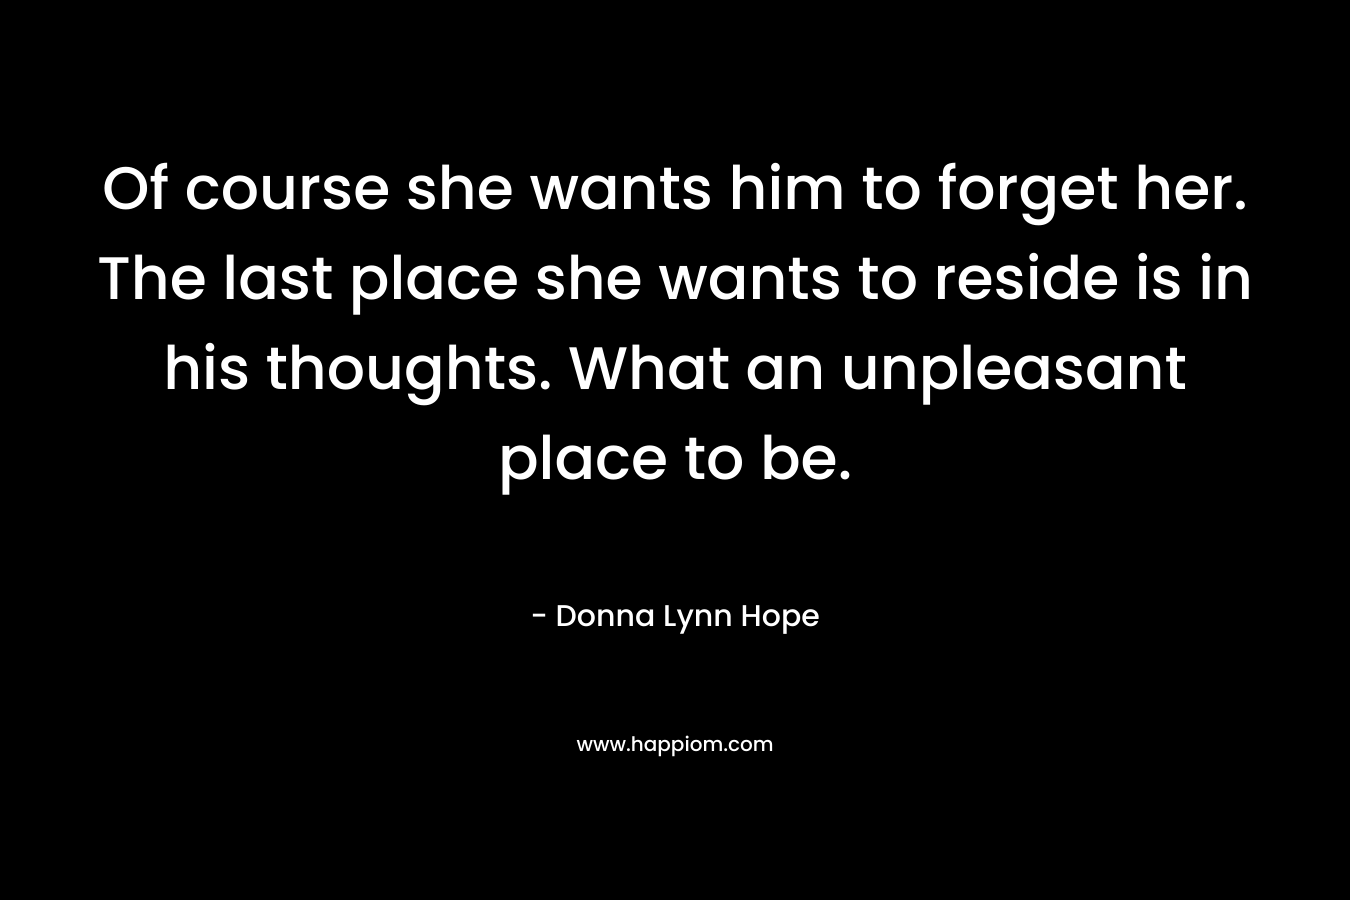 Of course she wants him to forget her. The last place she wants to reside is in his thoughts. What an unpleasant place to be.